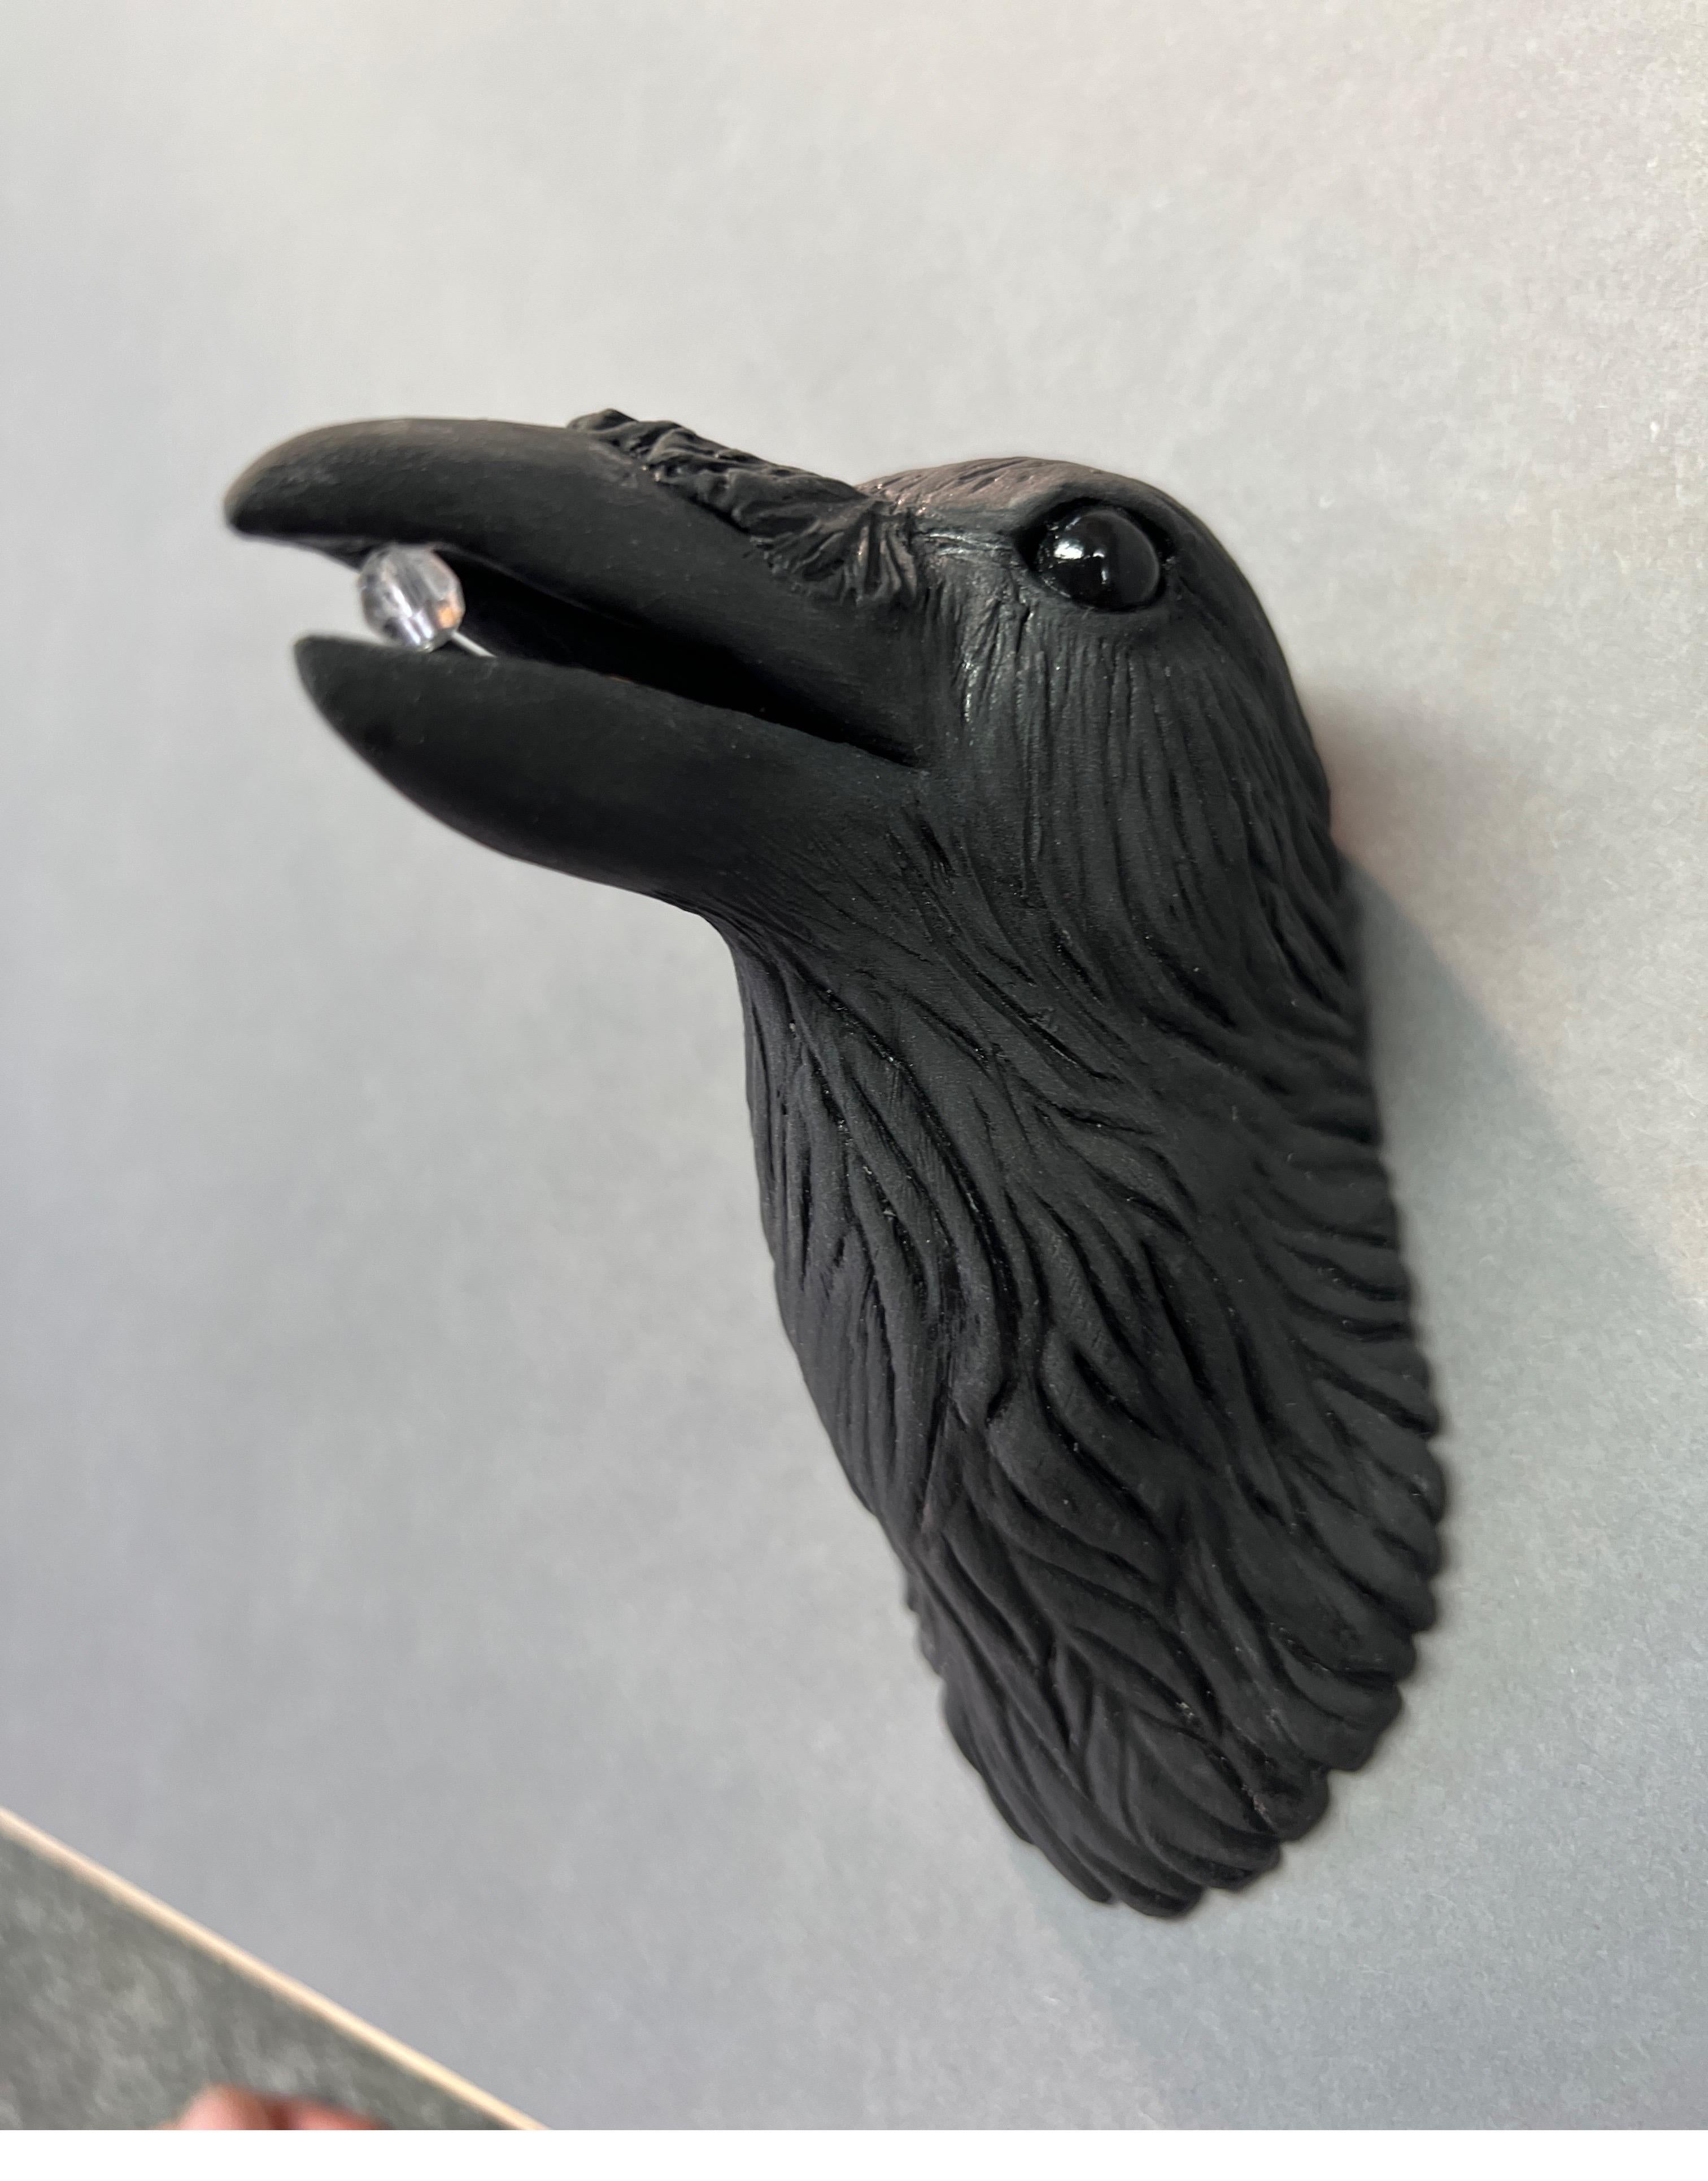 Ceramic Wall Sculpture of Crow #9 with Crystal in Beak - Gray Still-Life Sculpture by Karla Walter